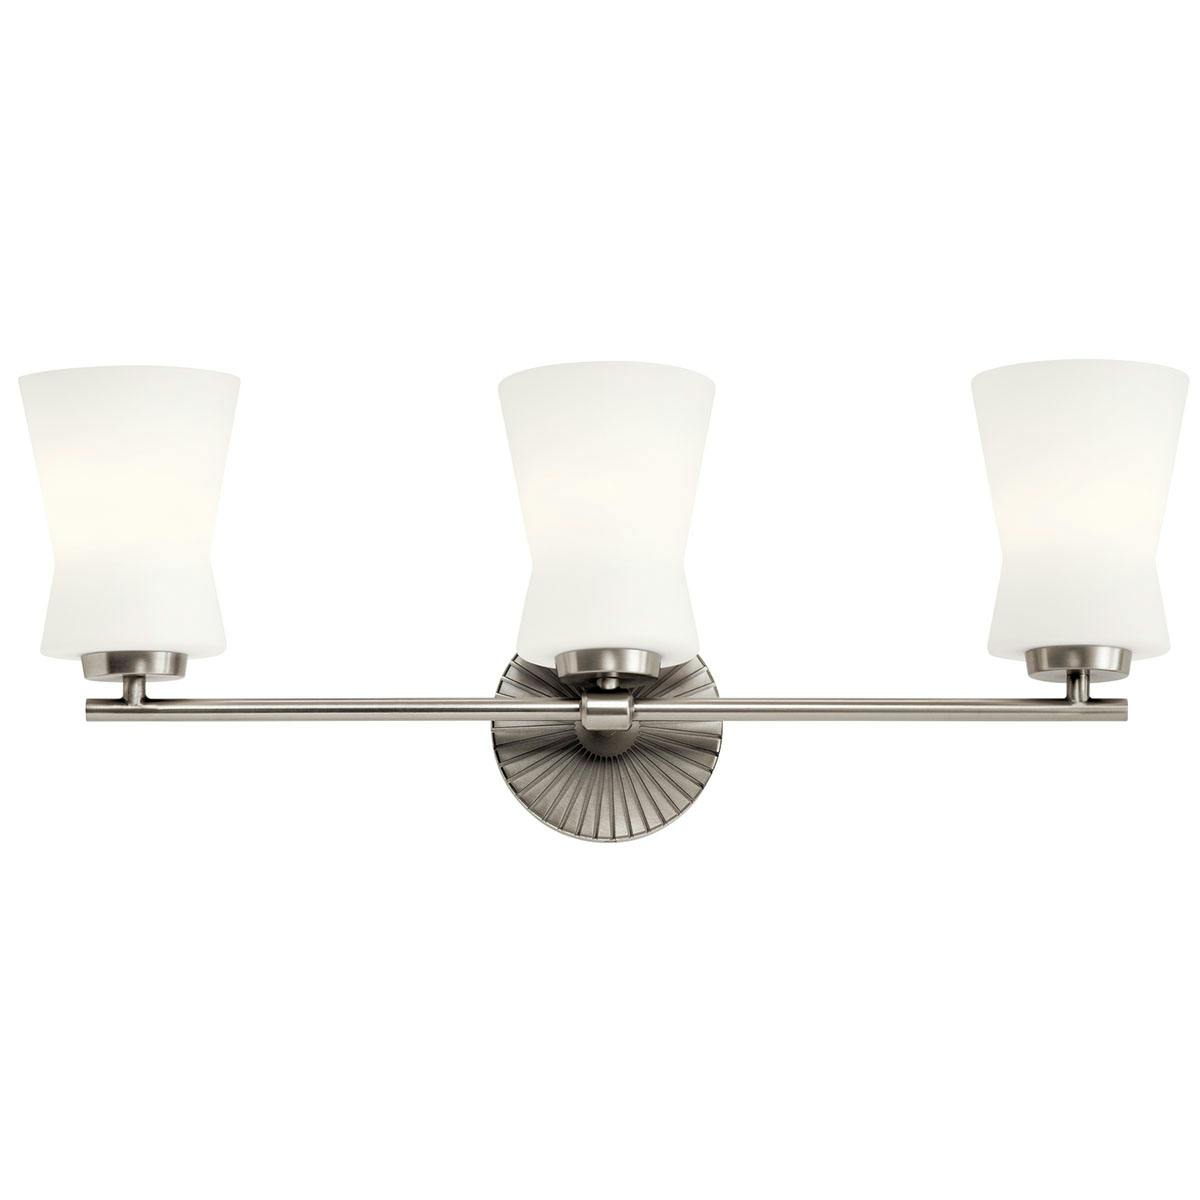 Front view of the Brianne 3 Light Vanity Light Pewter on a white background